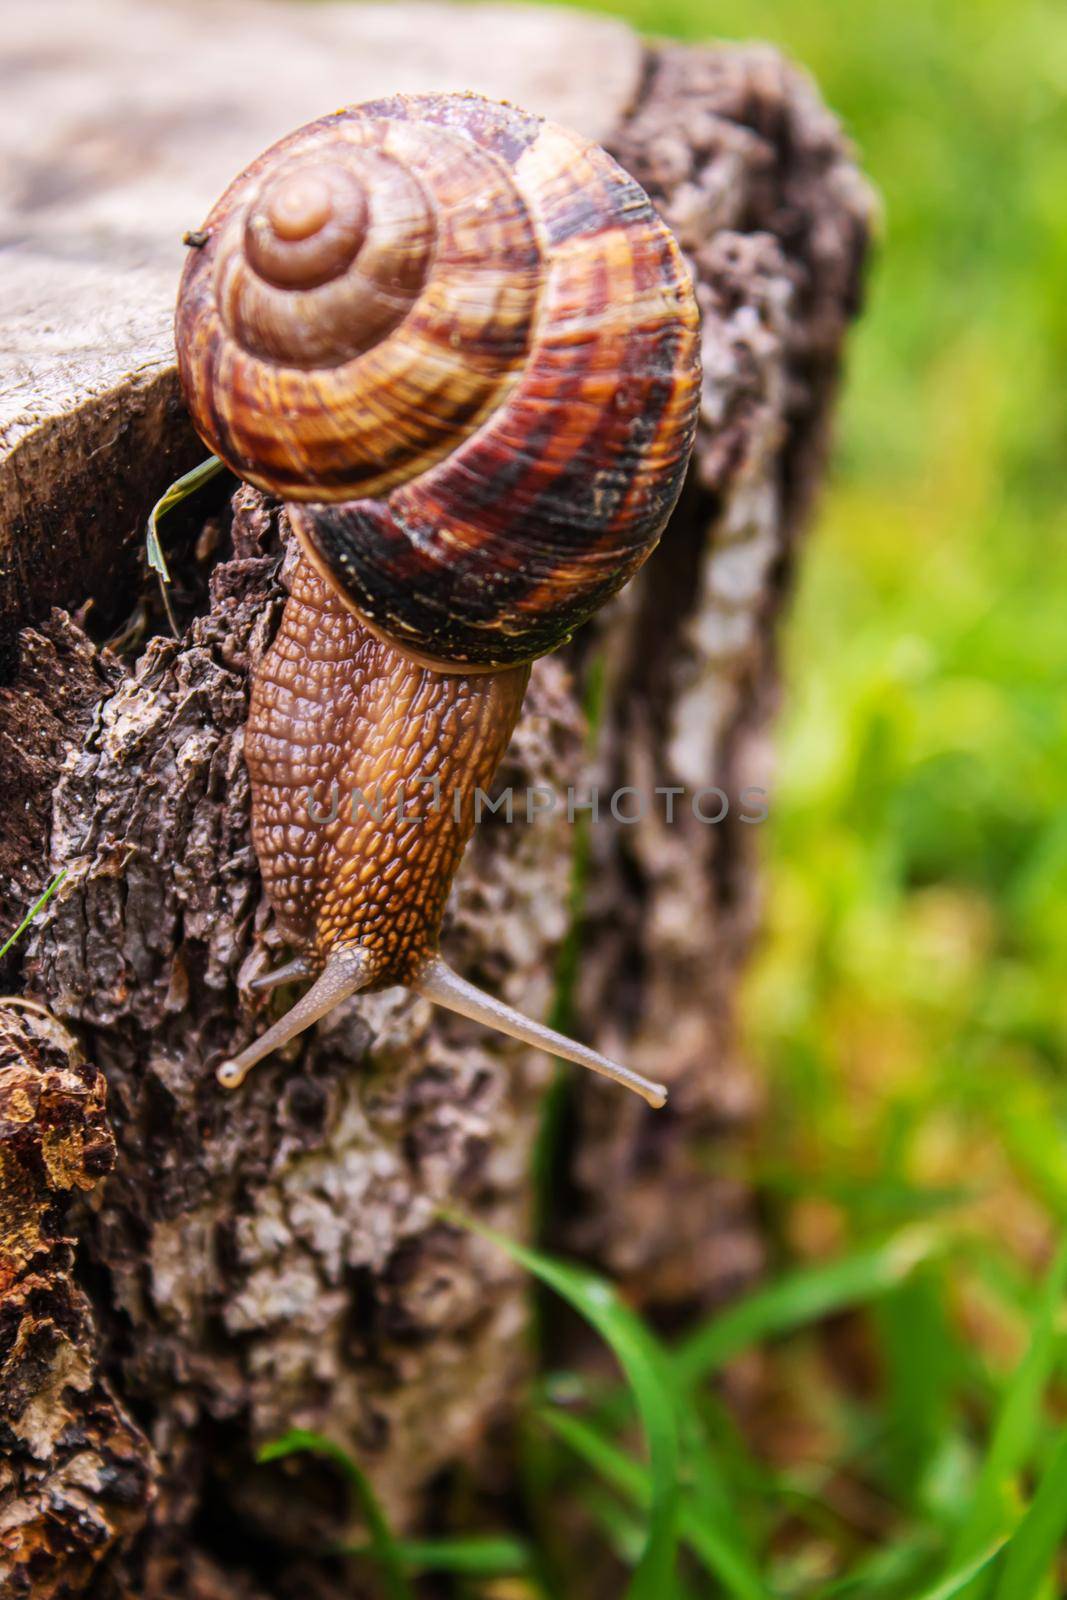 Snails in nature on a tree. Selective focus. by mila1784